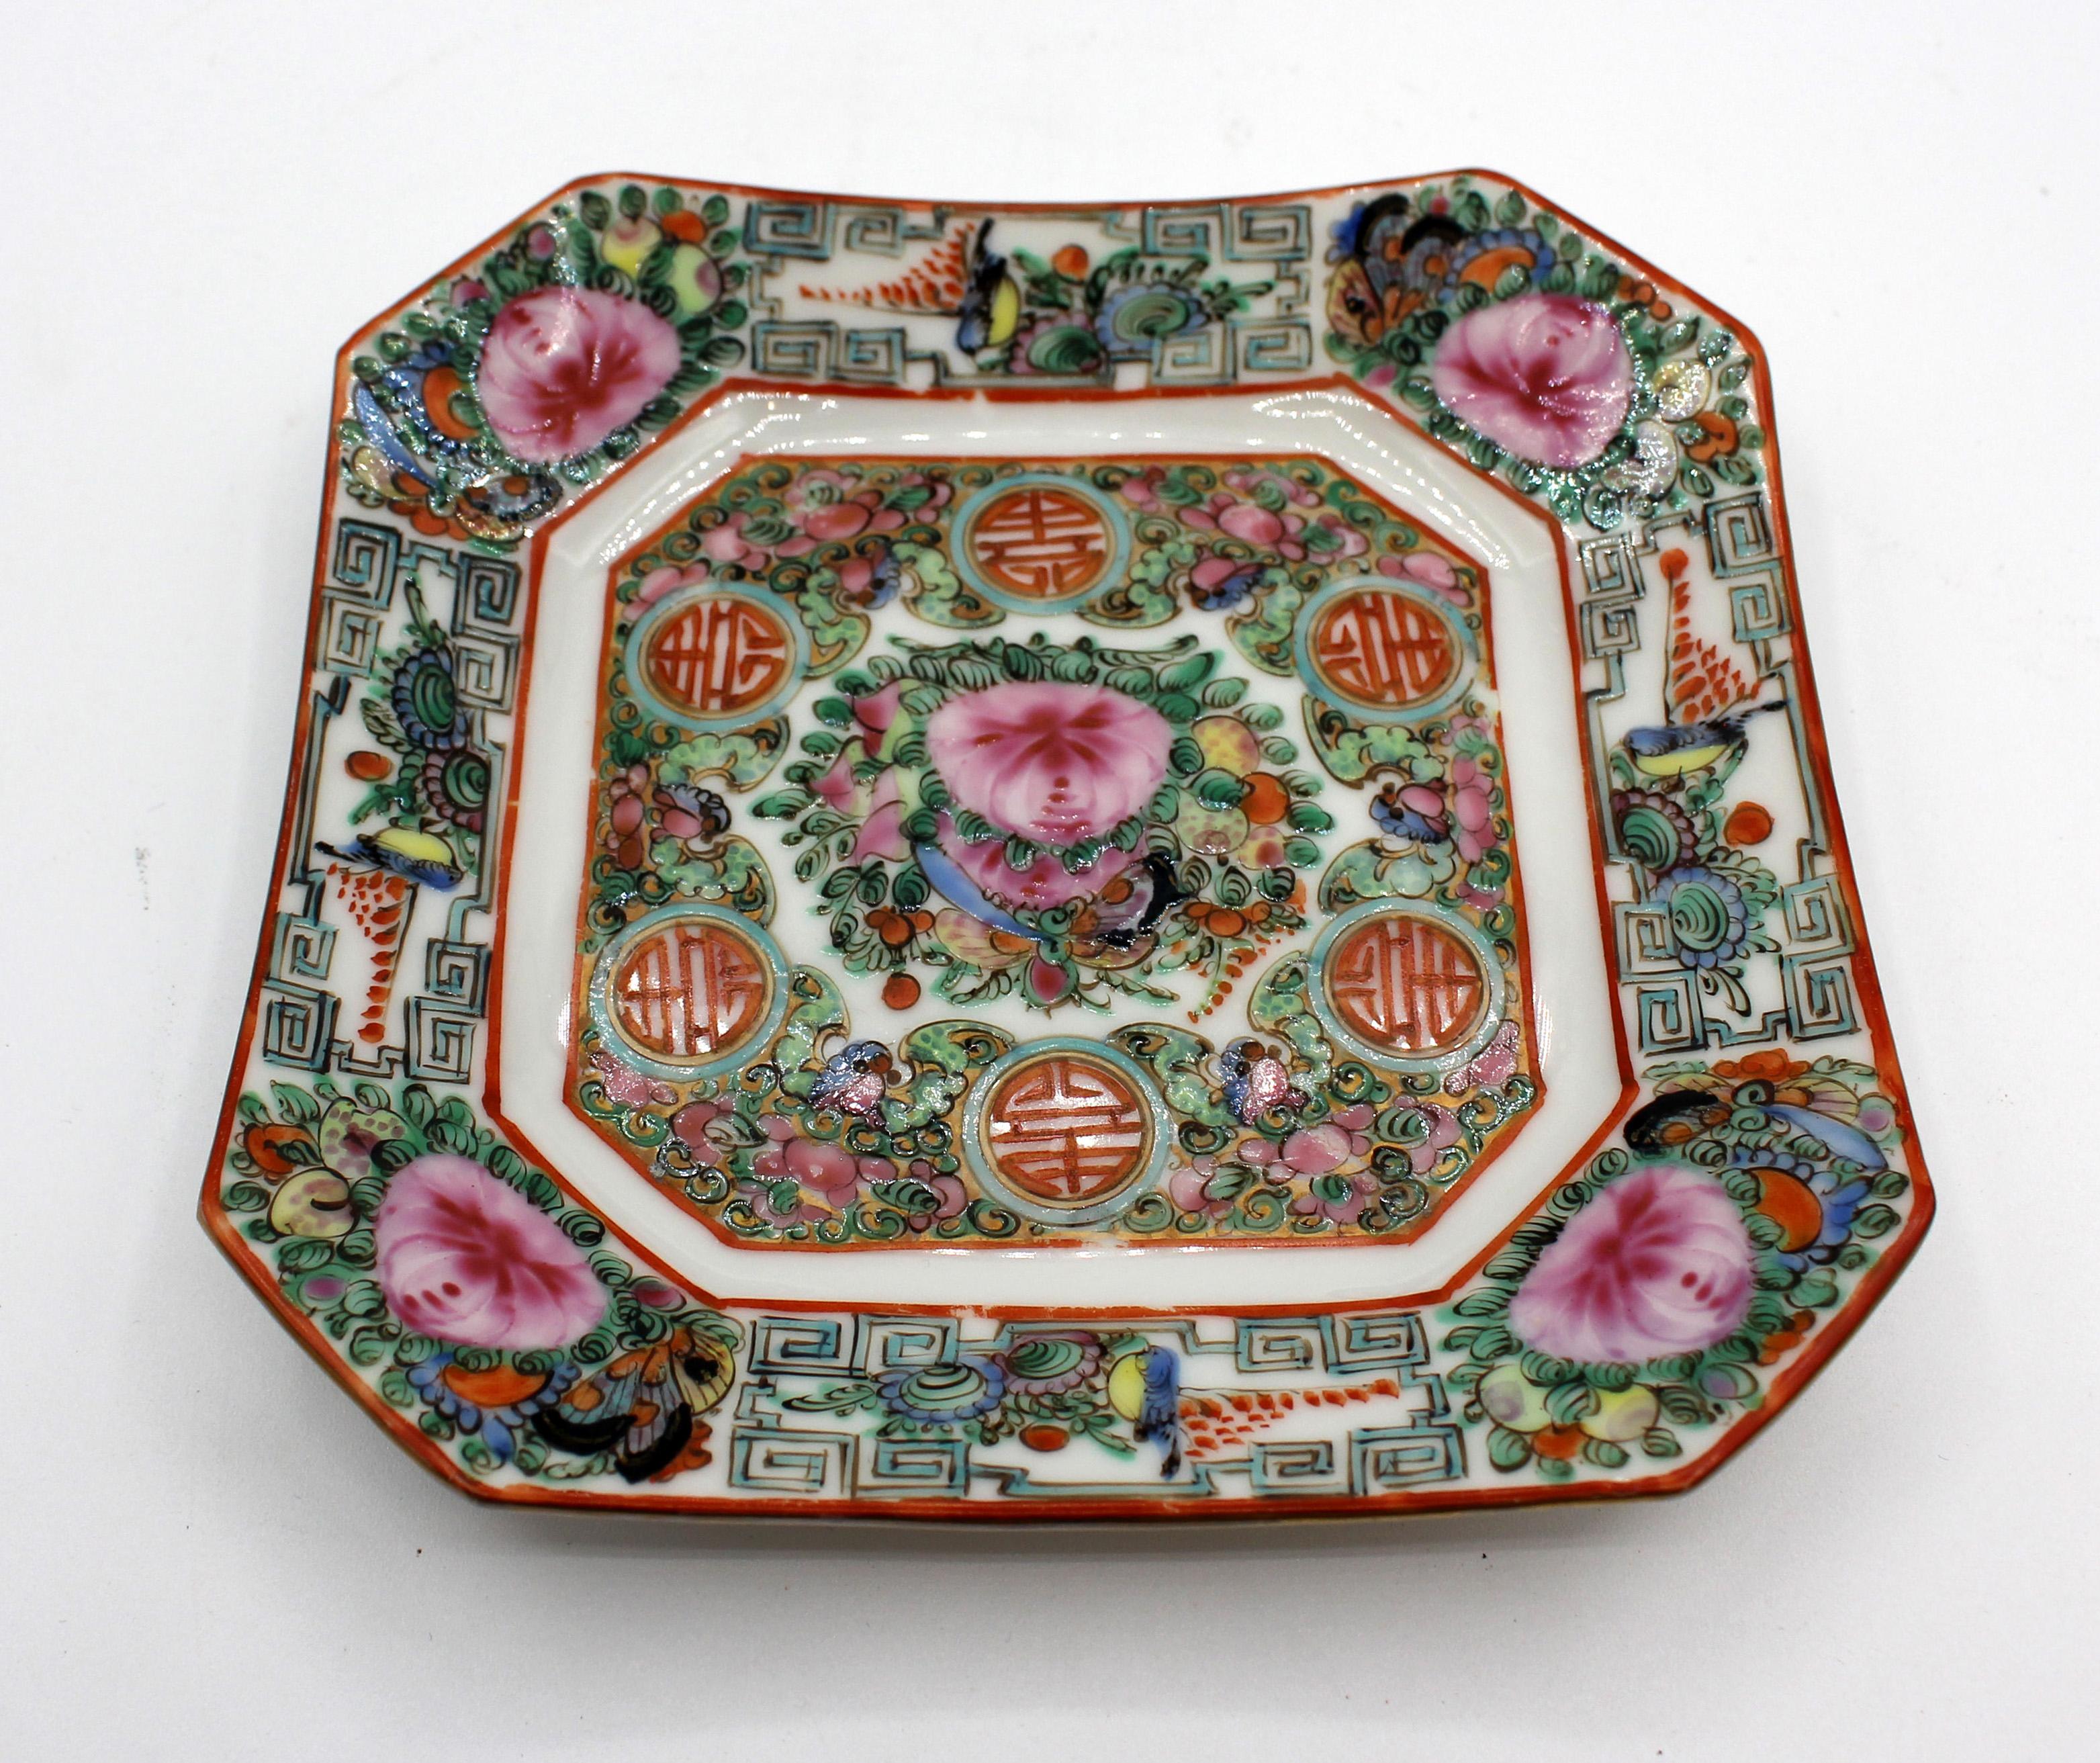 Early 20th century set of 6 rose canton square bread & butter or dessert plates. Chinese export porcelain. Republic era Made in China & China marks.

Measure: 6